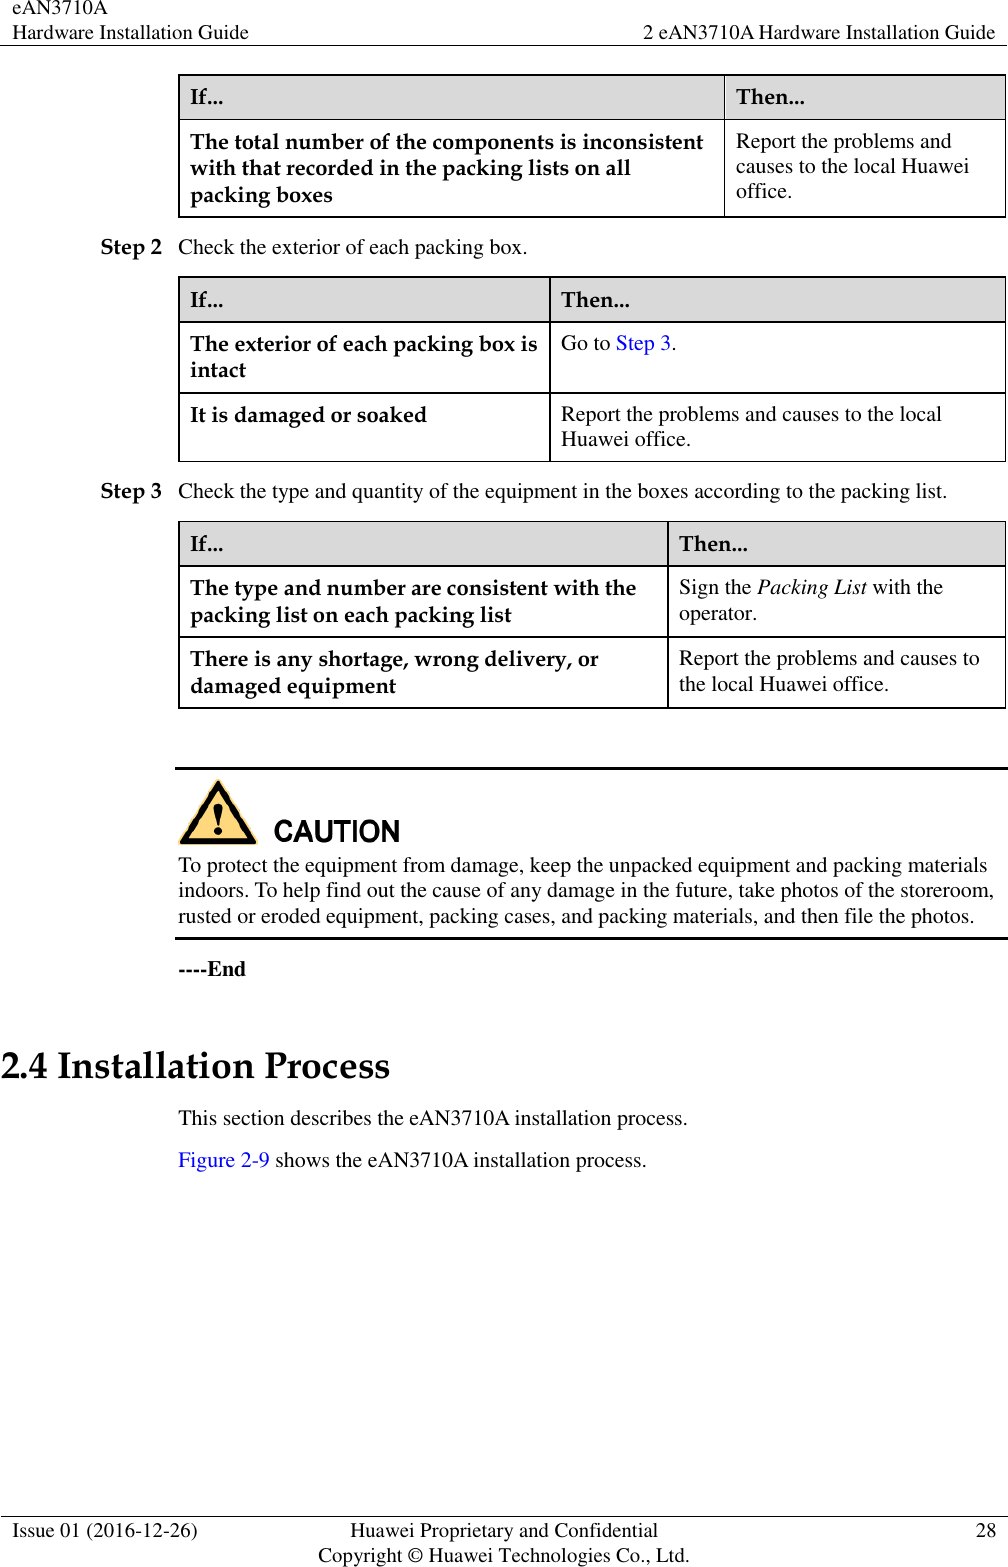 eAN3710A Hardware Installation Guide 2 eAN3710A Hardware Installation Guide  Issue 01 (2016-12-26) Huawei Proprietary and Confidential                                     Copyright © Huawei Technologies Co., Ltd. 28  If... Then... The total number of the components is inconsistent with that recorded in the packing lists on all packing boxes Report the problems and causes to the local Huawei office. Step 2 Check the exterior of each packing box.   If... Then... The exterior of each packing box is intact Go to Step 3. It is damaged or soaked Report the problems and causes to the local Huawei office. Step 3 Check the type and quantity of the equipment in the boxes according to the packing list. If... Then... The type and number are consistent with the packing list on each packing list Sign the Packing List with the operator.   There is any shortage, wrong delivery, or damaged equipment Report the problems and causes to the local Huawei office.   To protect the equipment from damage, keep the unpacked equipment and packing materials indoors. To help find out the cause of any damage in the future, take photos of the storeroom, rusted or eroded equipment, packing cases, and packing materials, and then file the photos.   ----End 2.4 Installation Process This section describes the eAN3710A installation process.   Figure 2-9 shows the eAN3710A installation process. 